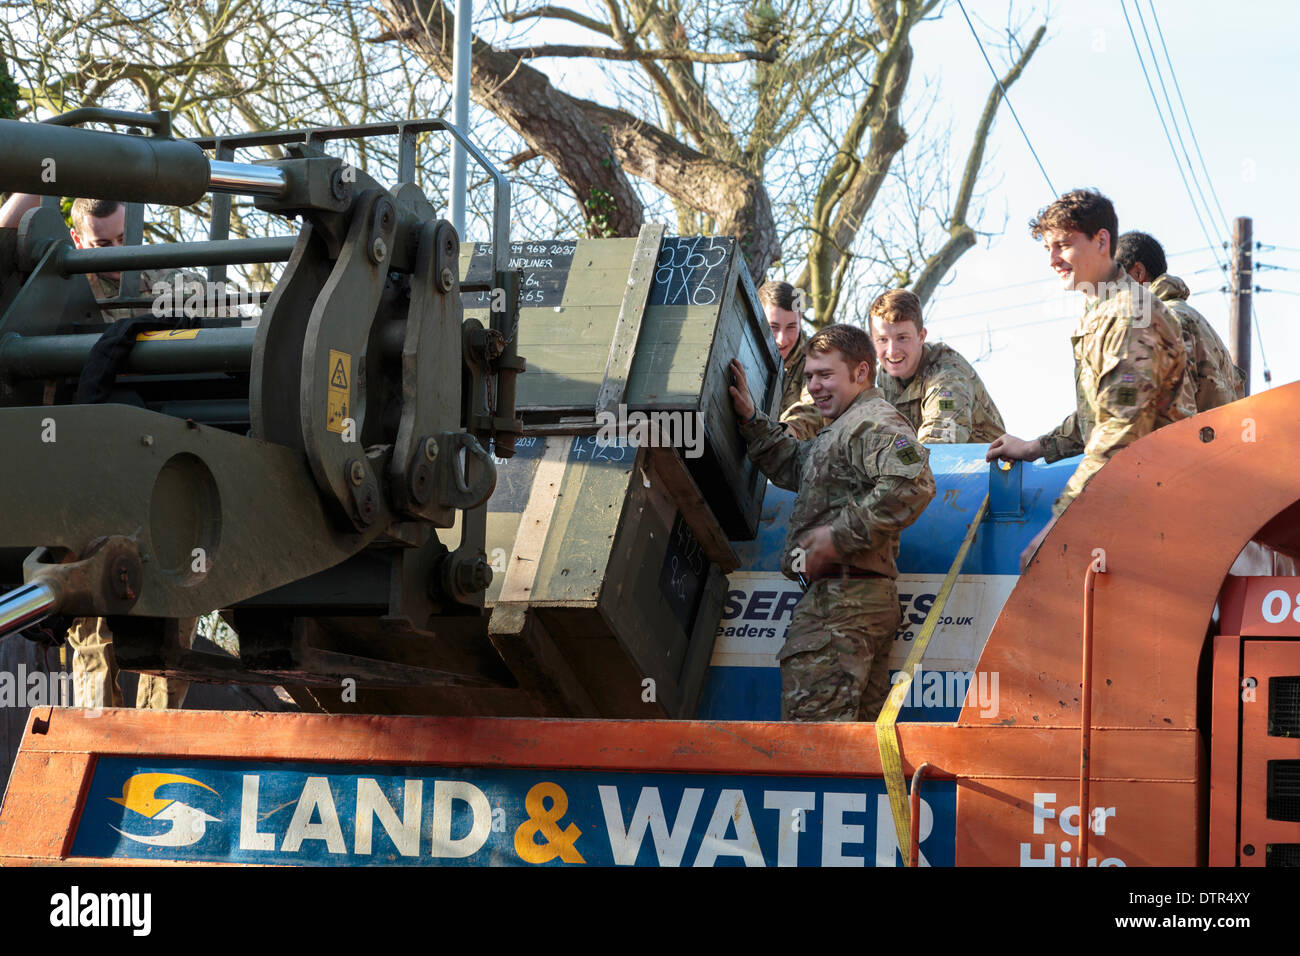 Burrowbridge, UK. 22nd Feb, 2014. Commandos helping at Burrowbridge on the flooded Somerset Levels on February 22, 2014. A group of soldiers load crates of supplies onto an Environment Agency Trac-dumper, a specialised vehicle capable of going through deep water. Supplies of oil and mechanical parts are sent to Saltmoor Pumping Station where water from Northmoor is being pumped into the tidal River Parrett to provide relief to the flooded area.These are the worst floods on the Somerset Levels in living history. Stock Photo